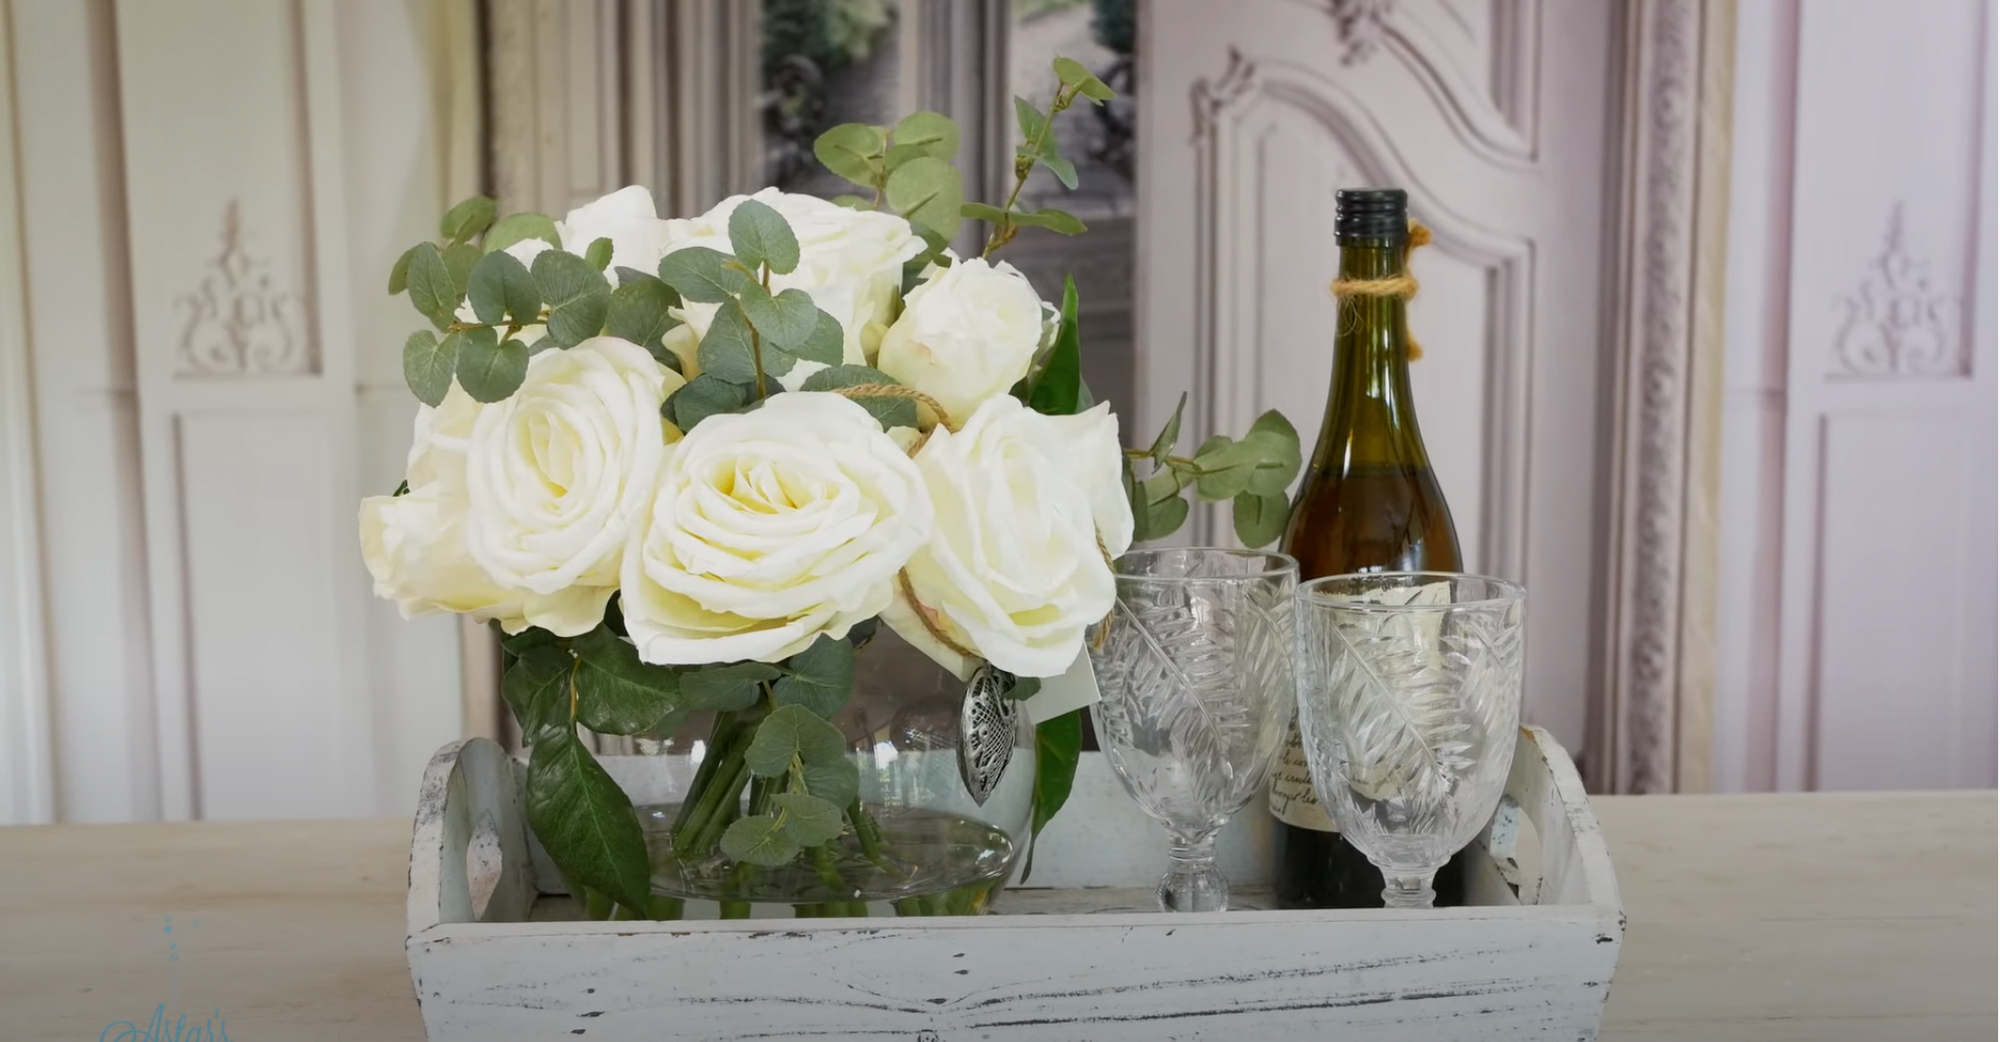 A Valentine's Day Gift Idea: White Roses in a Bubble Bowl